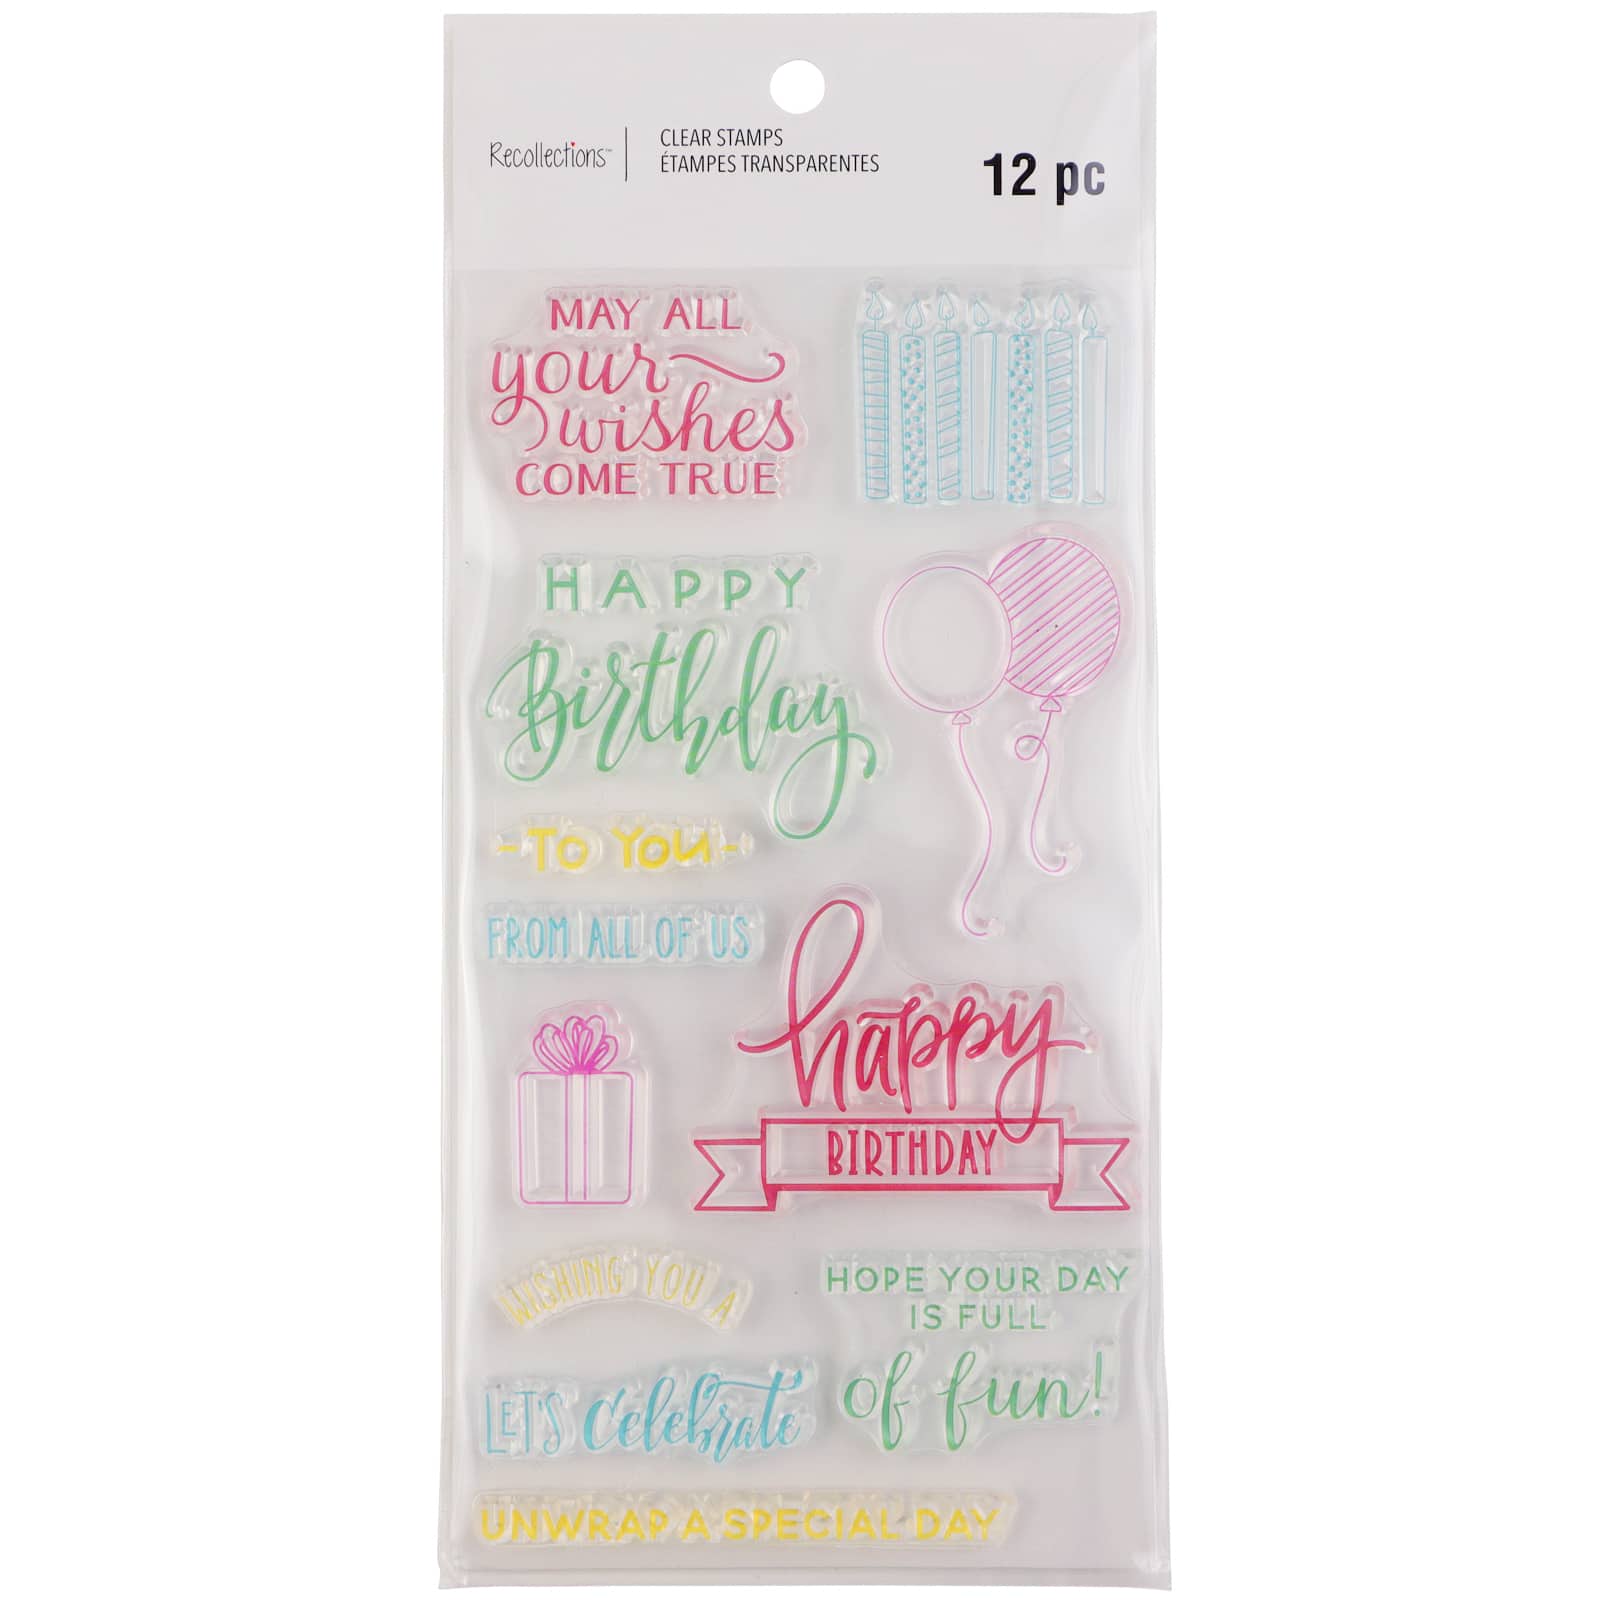 Happy Birthday Presents Craft Stamp - Simply Stamps